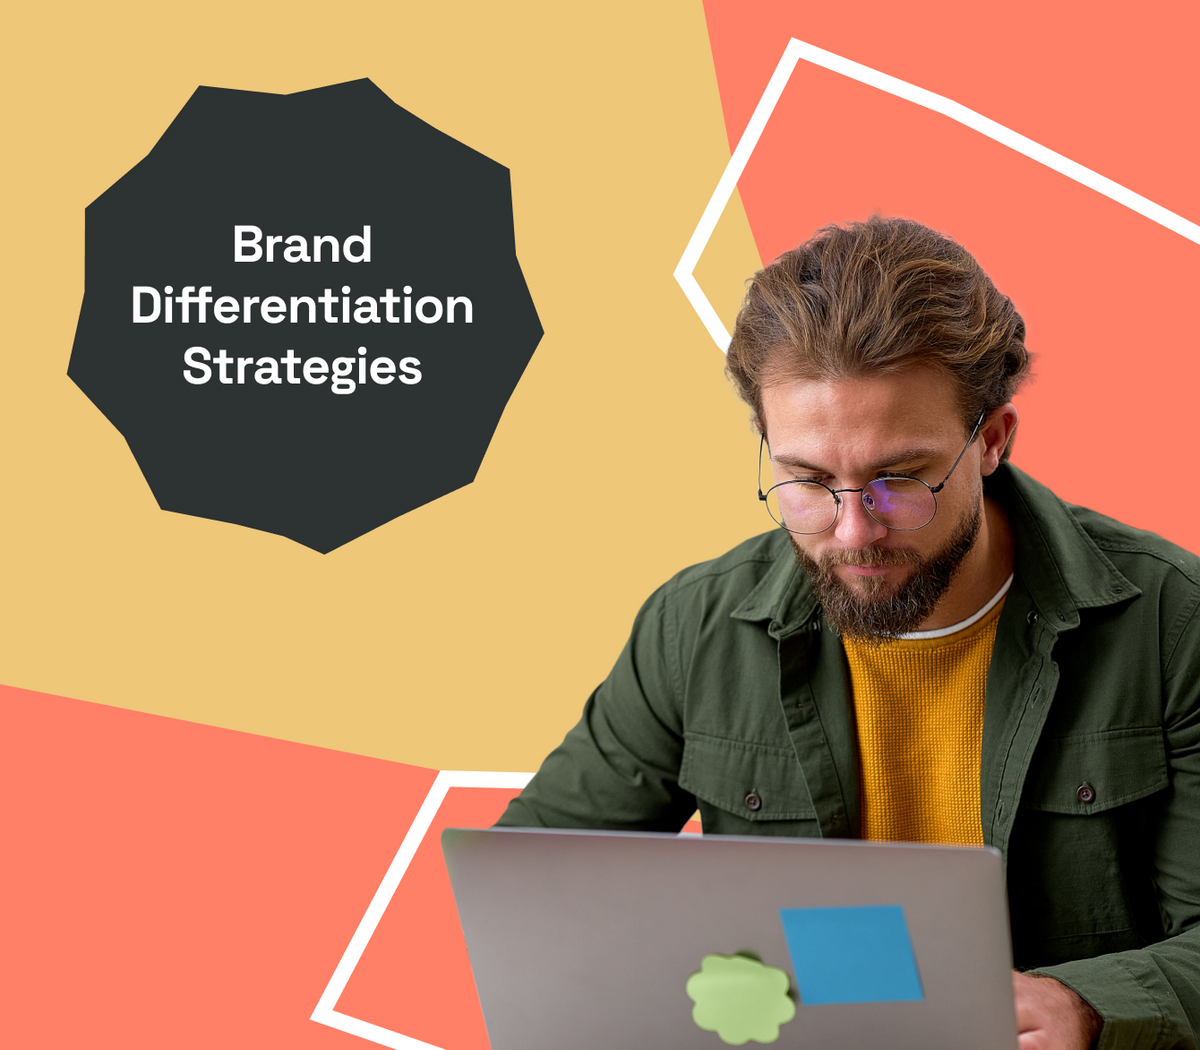 5-Reasons-Brand-Differentiation-Guide-Blog-Thumbnail-335x293